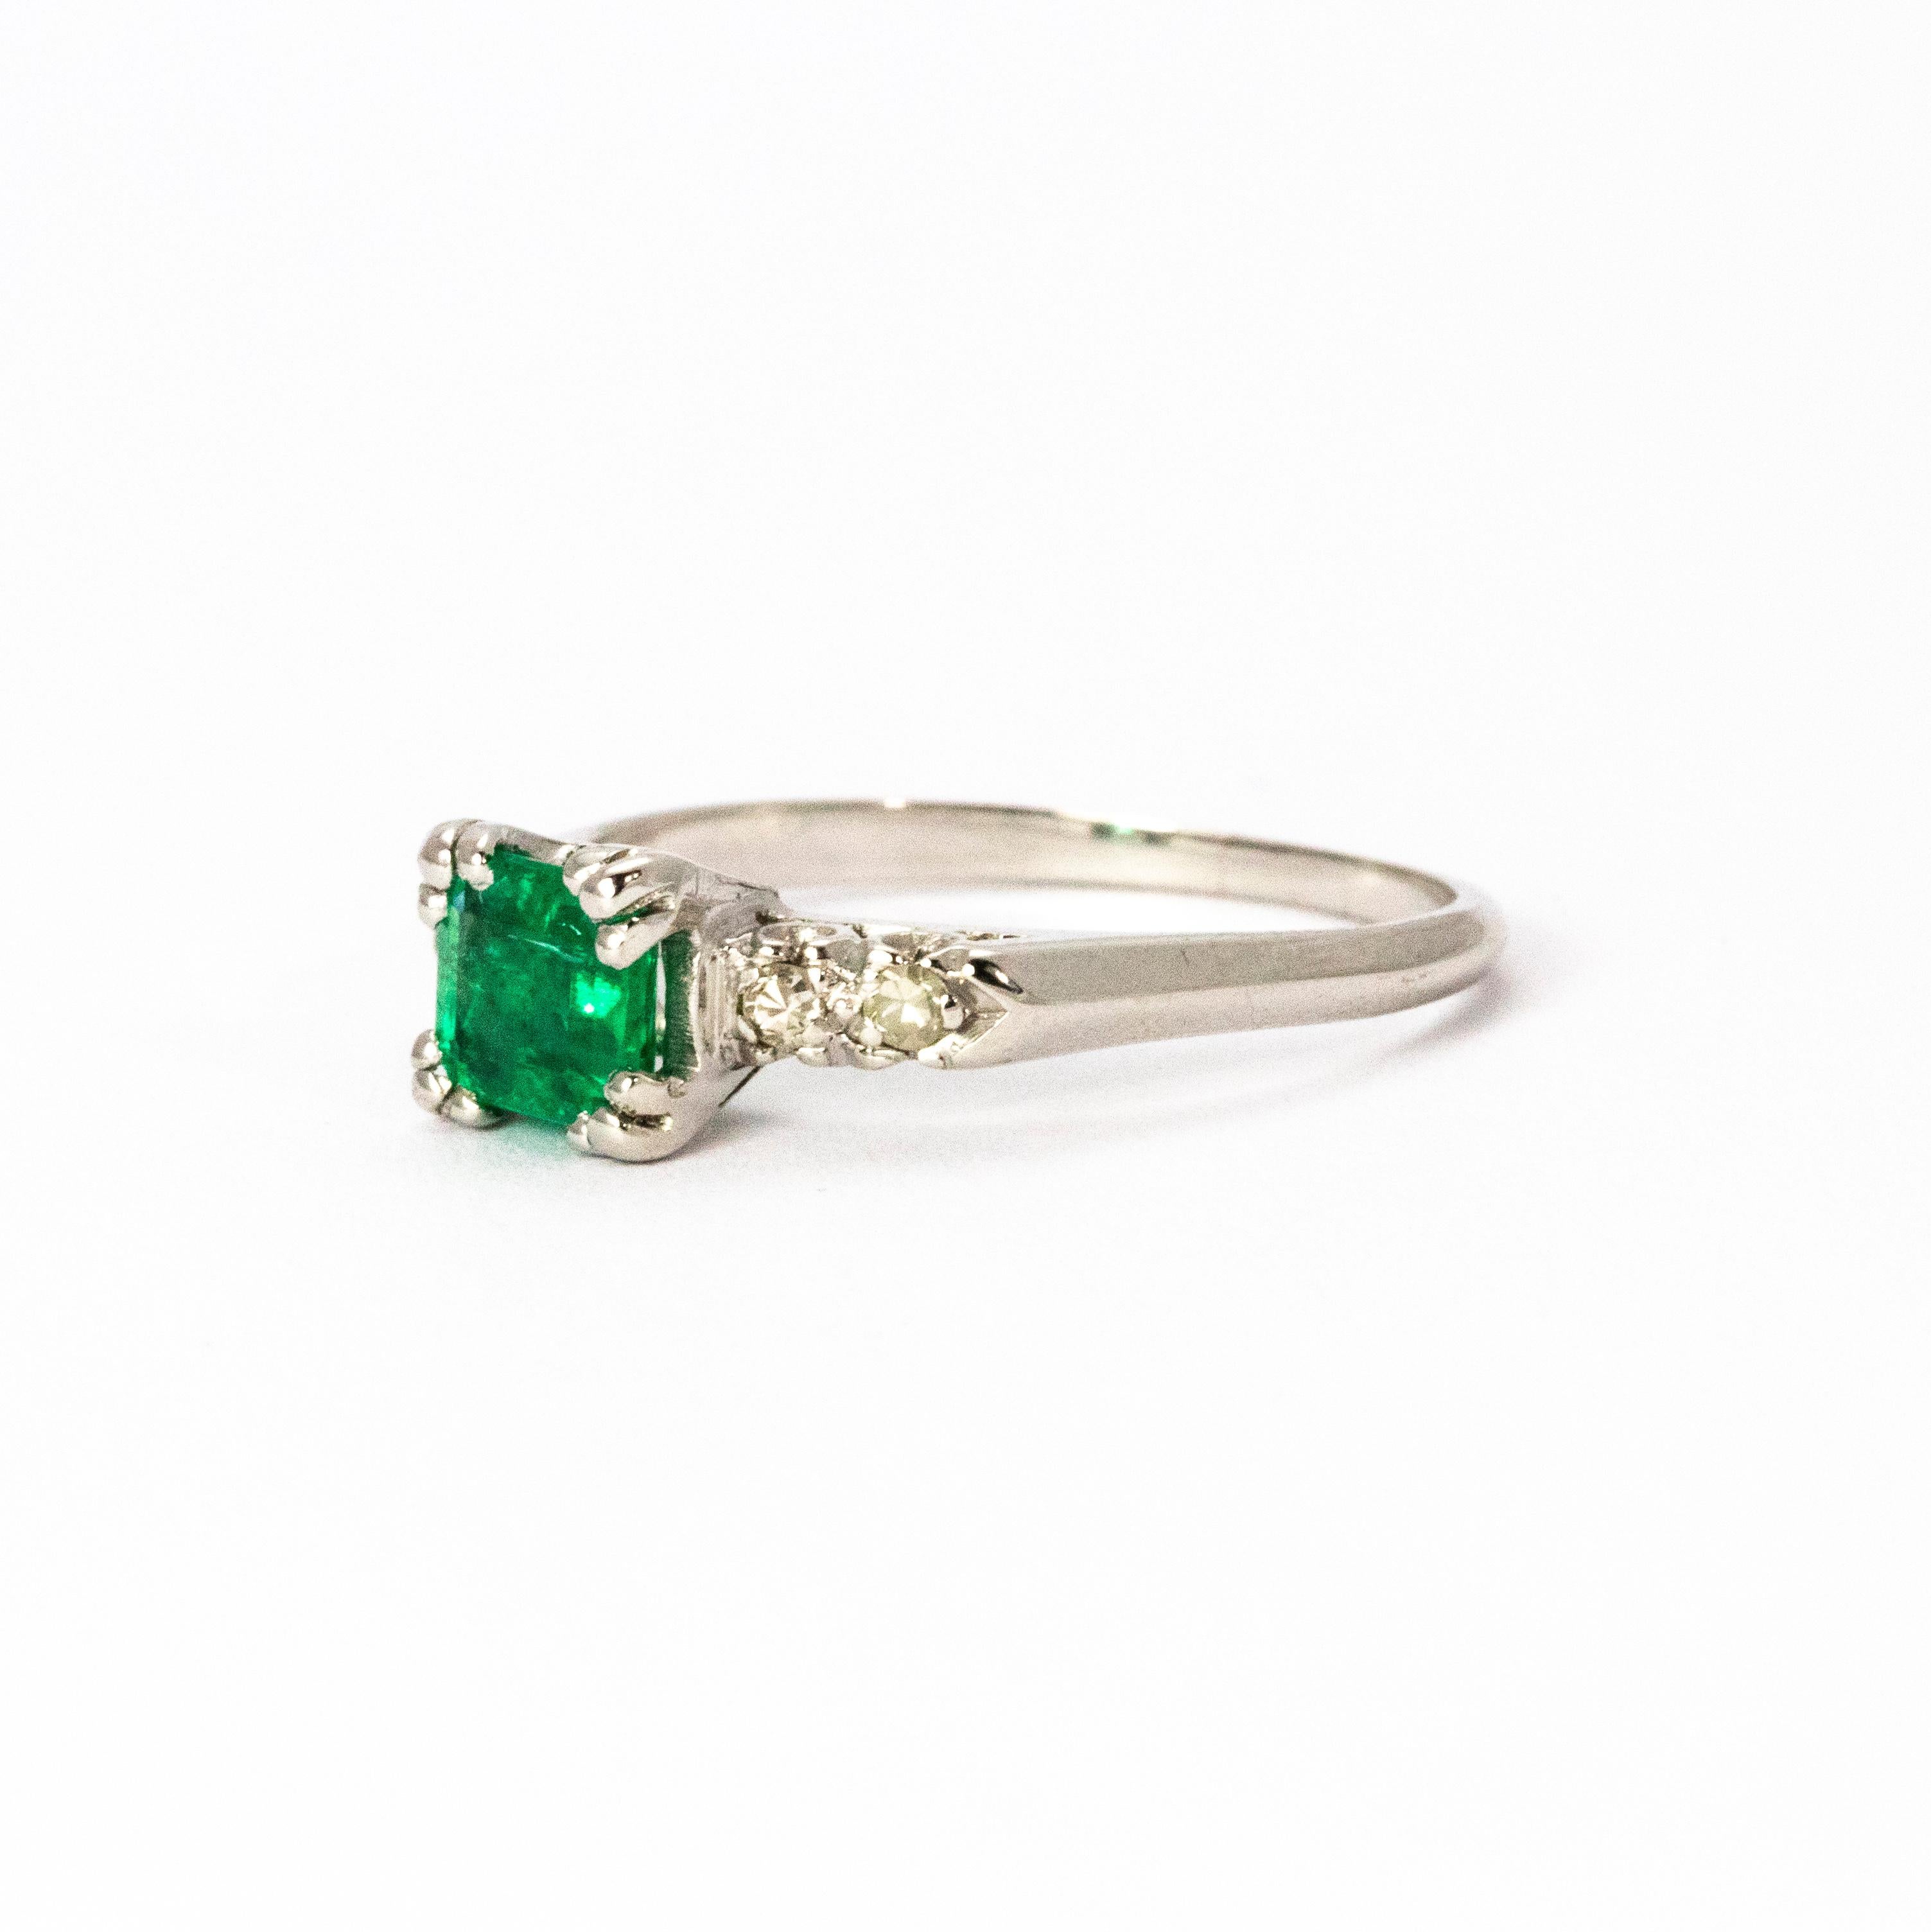 A wonderful vintage emerald and diamond solitaire ring. Boasting a beautiful emerald in a classic four-claw setting, and complemented by elegant diamond shoulders. Modelled in platinum.

Ring size: O 1/2 or 8